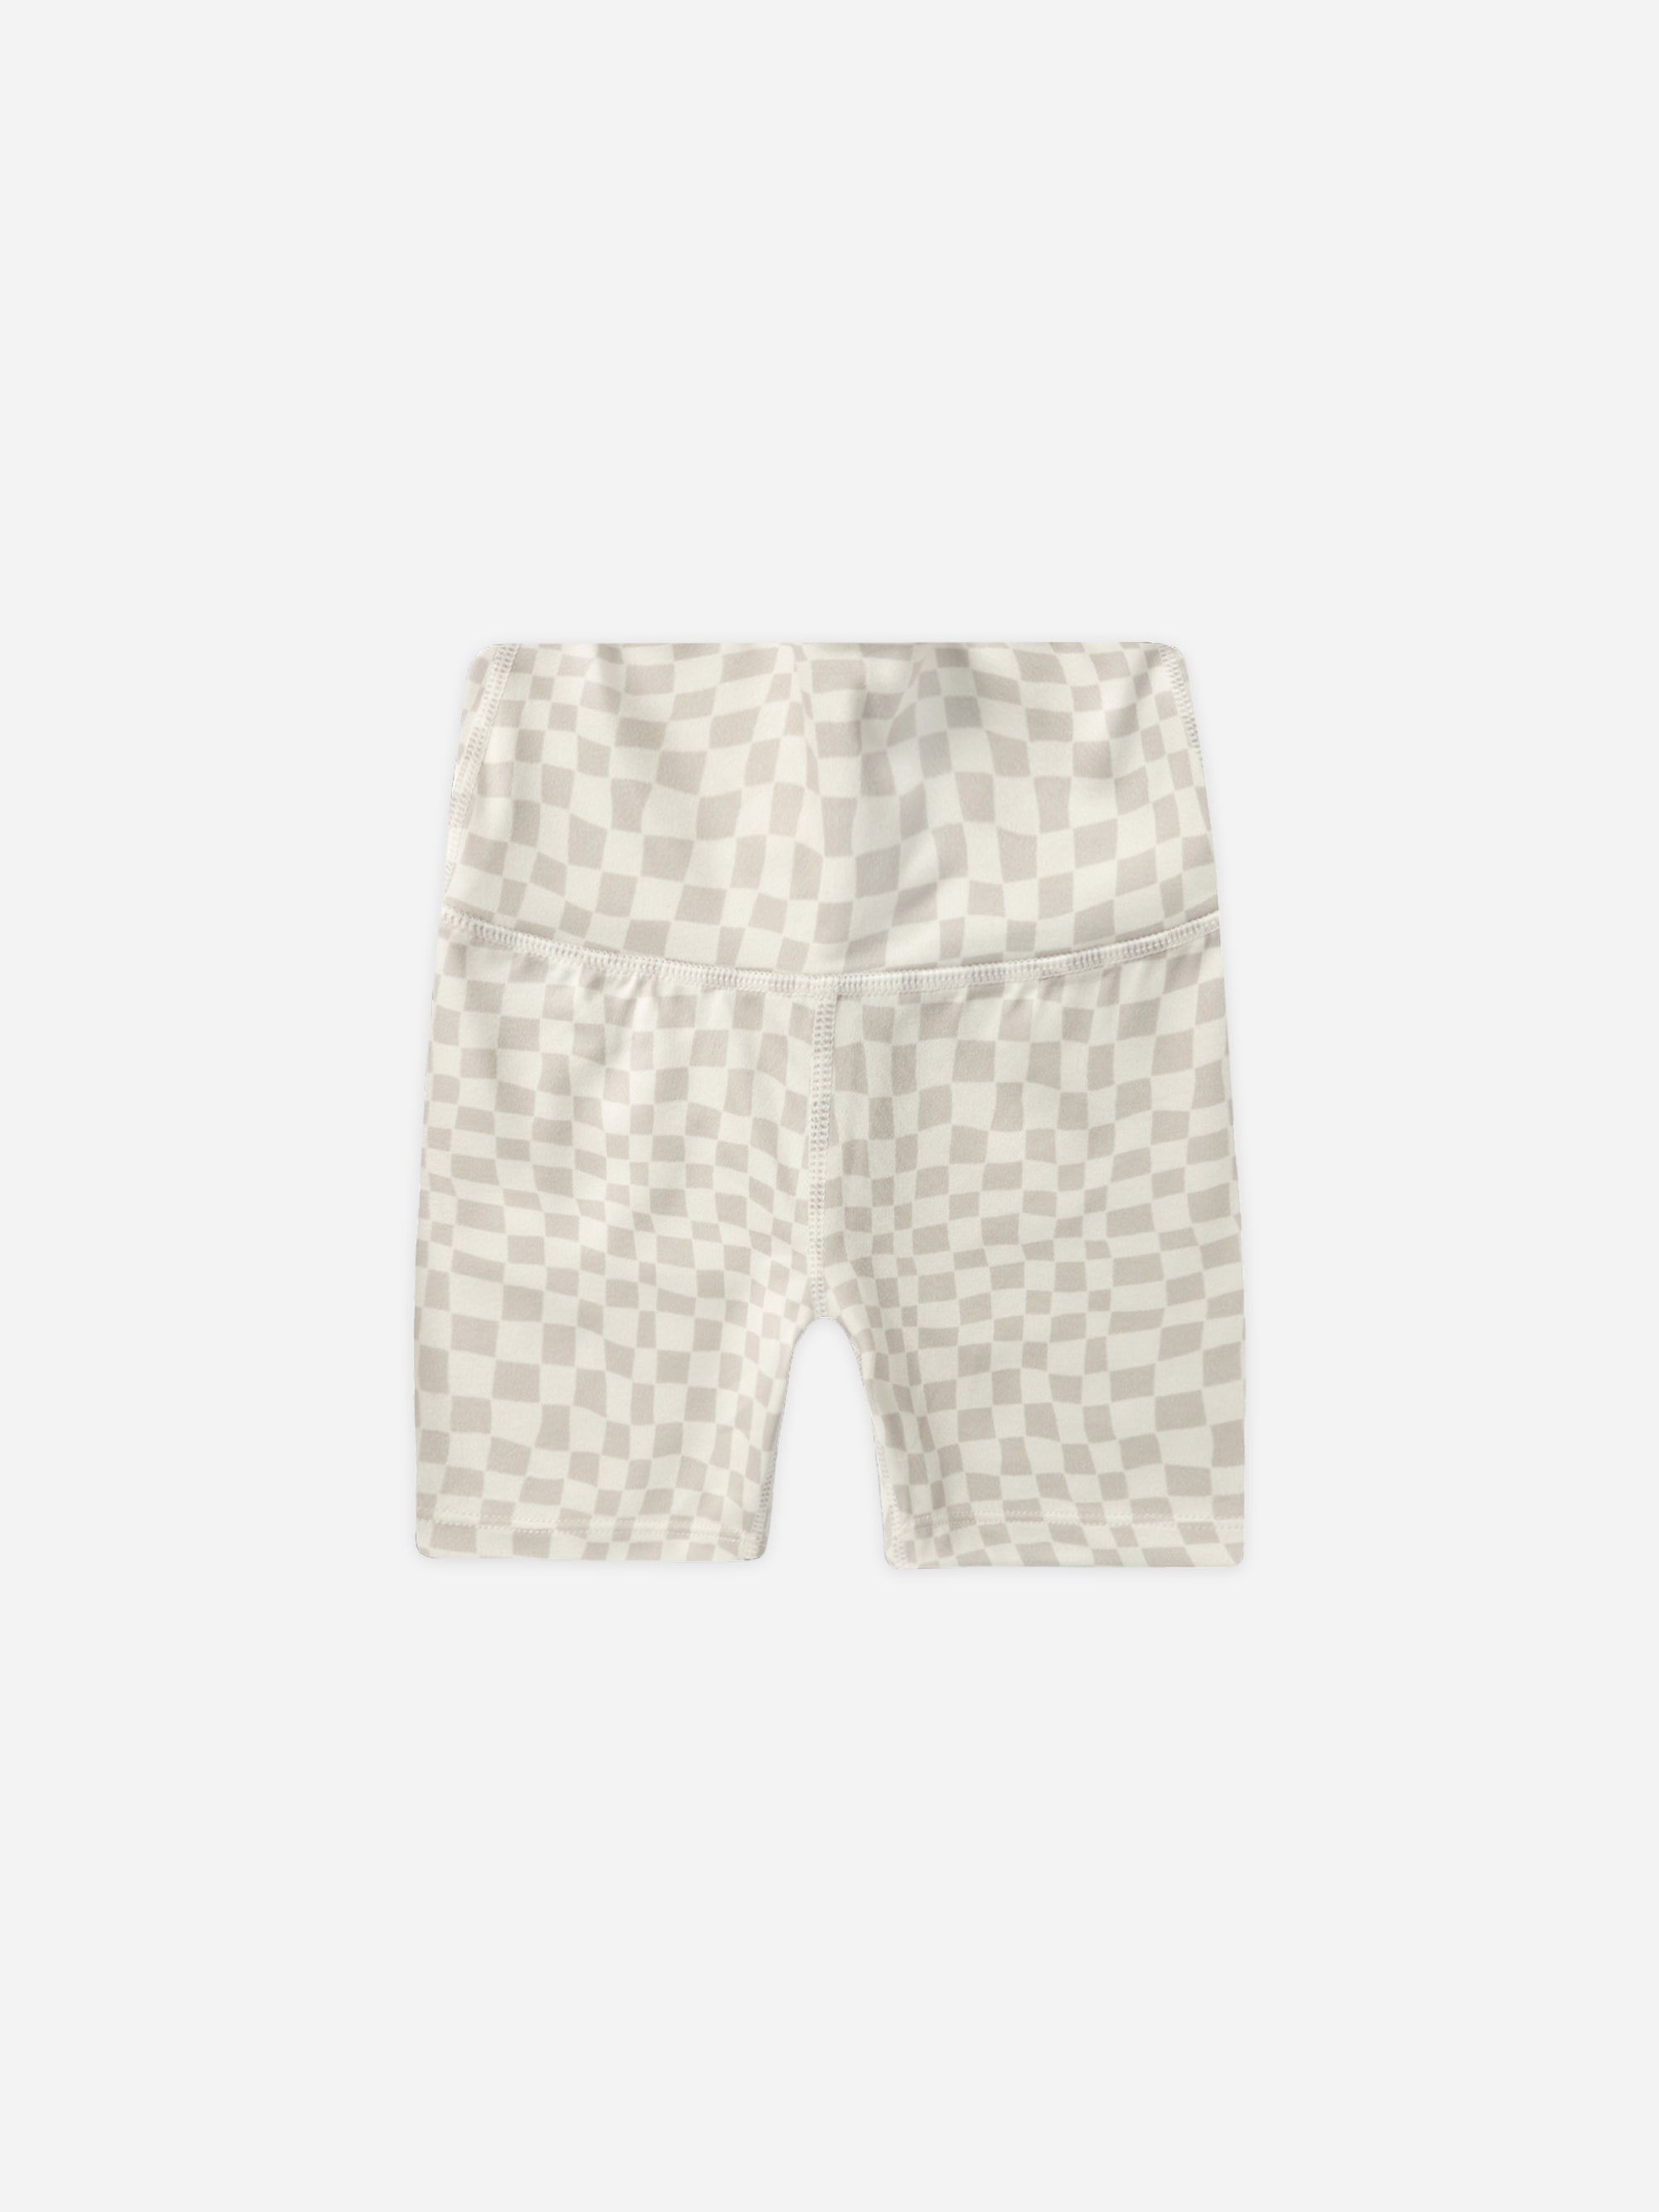 Bike Short || Dove Check - Rylee + Cru | Kids Clothes | Trendy Baby Clothes | Modern Infant Outfits |